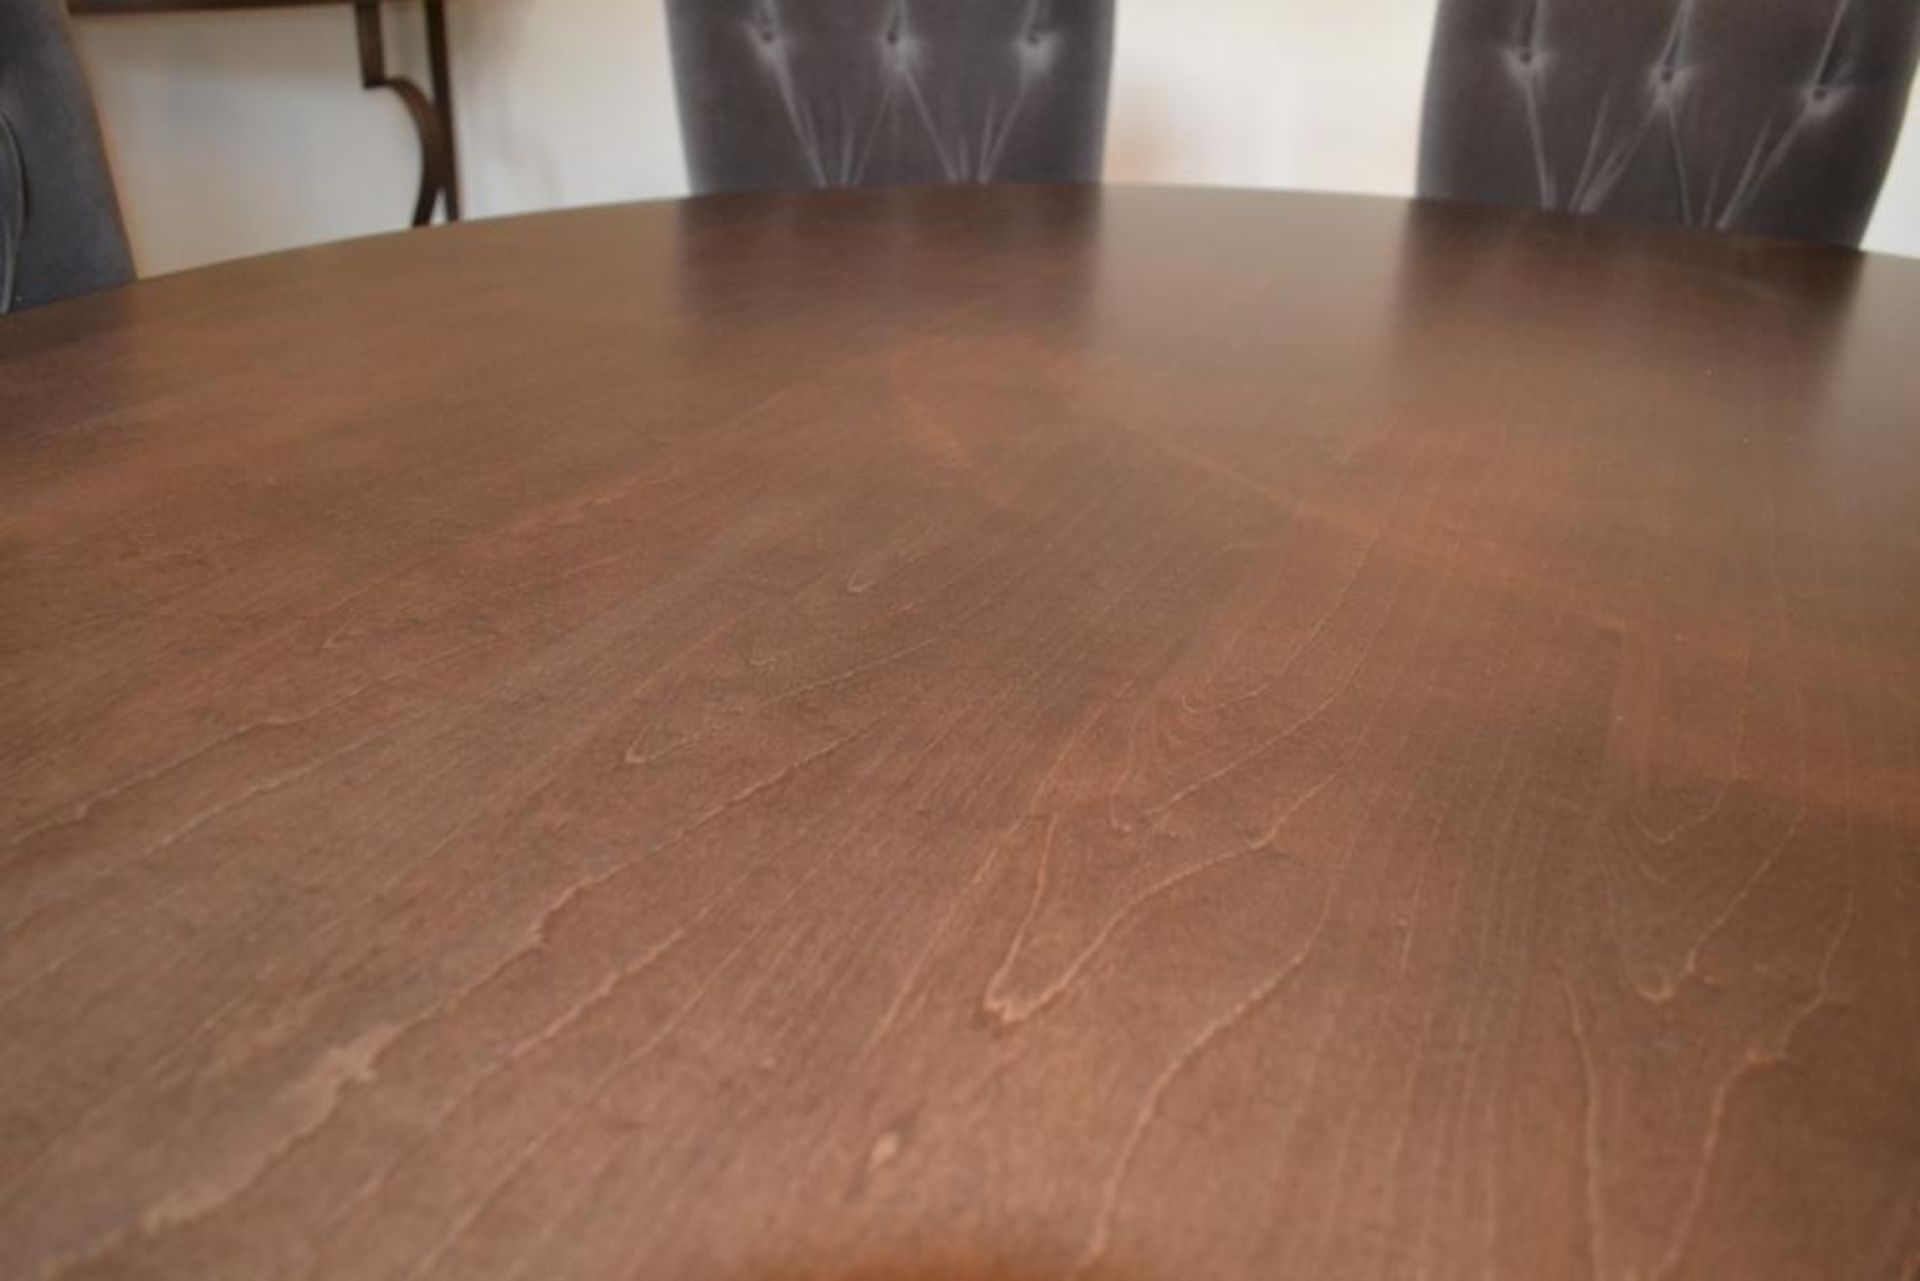 1 x Bespoke Round Dining Table With Sycamore Wood Finish - Includes Set of Six Grey Button Back - Image 12 of 20